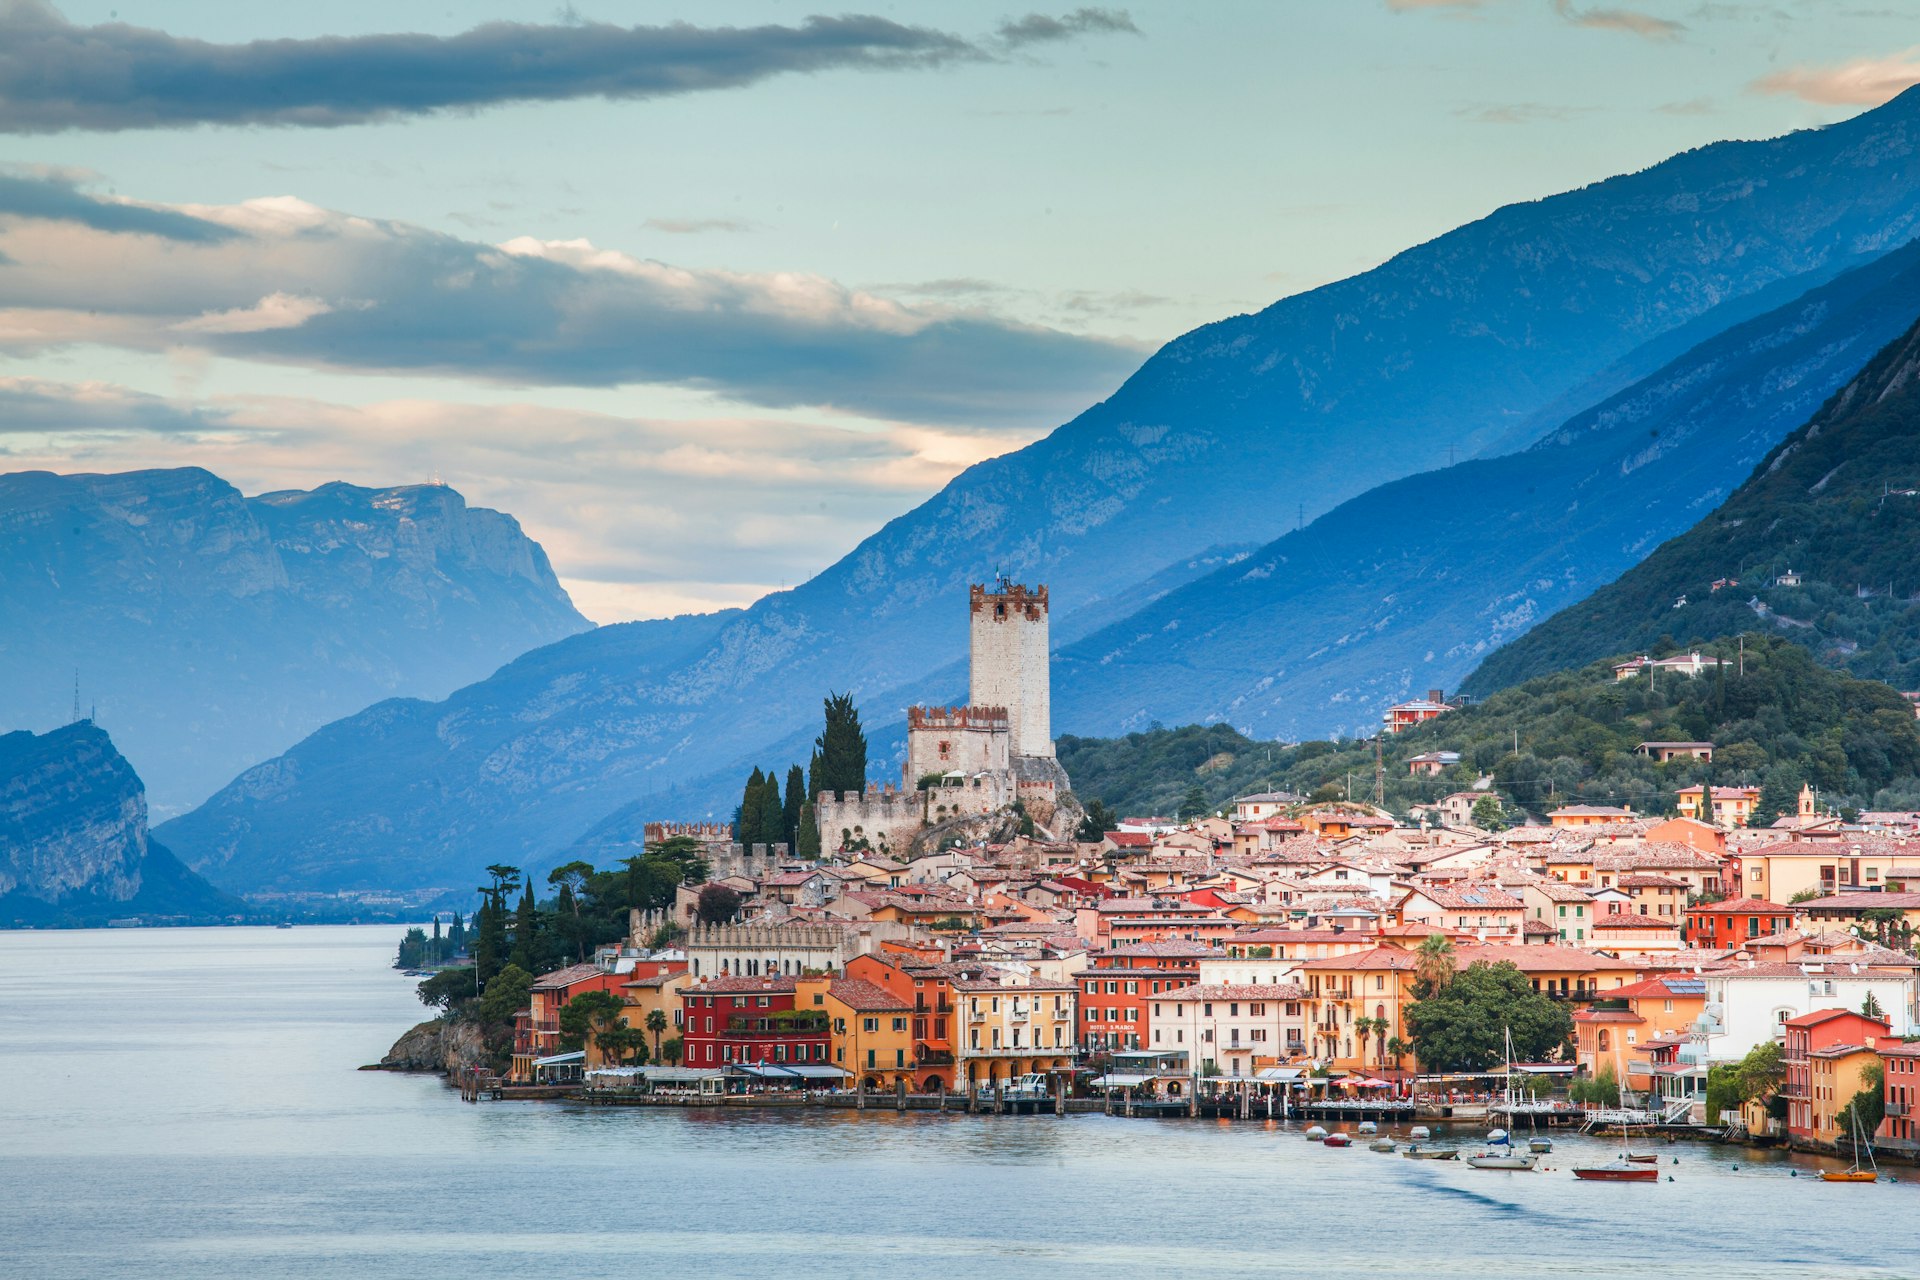 A beautiful Italian town sits on the edge of Lake Garda, with mountains in the background. 